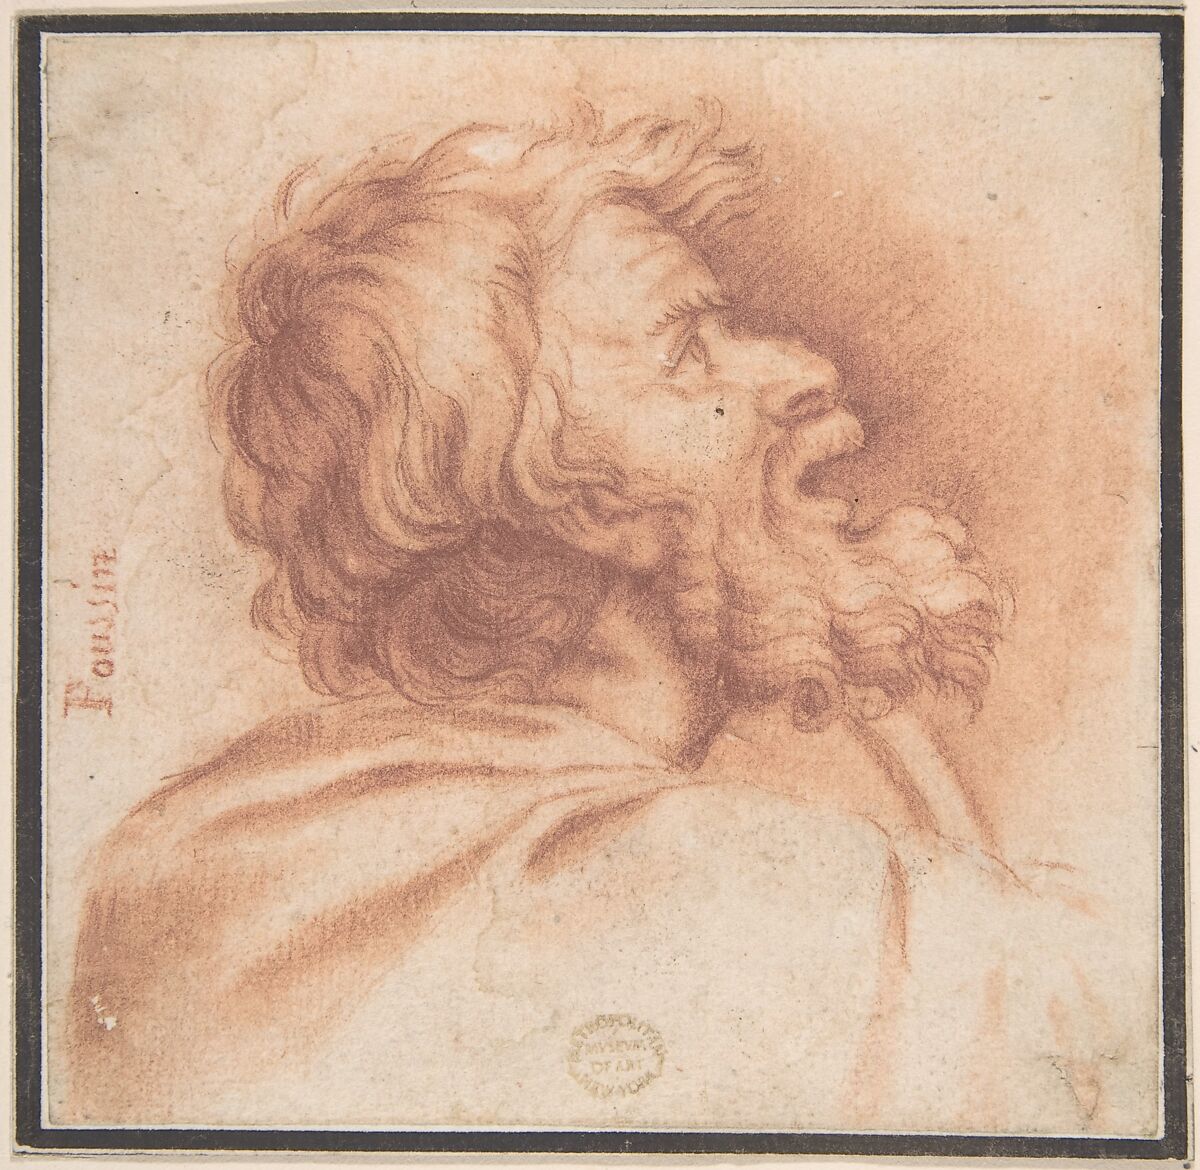 Head of Bearded Old Man Shown in Profile, Looking Up, Anonymous, Italian, Roman-Bolognese, 17th century, Red chalk on cream paper. Reworked counterproof? 